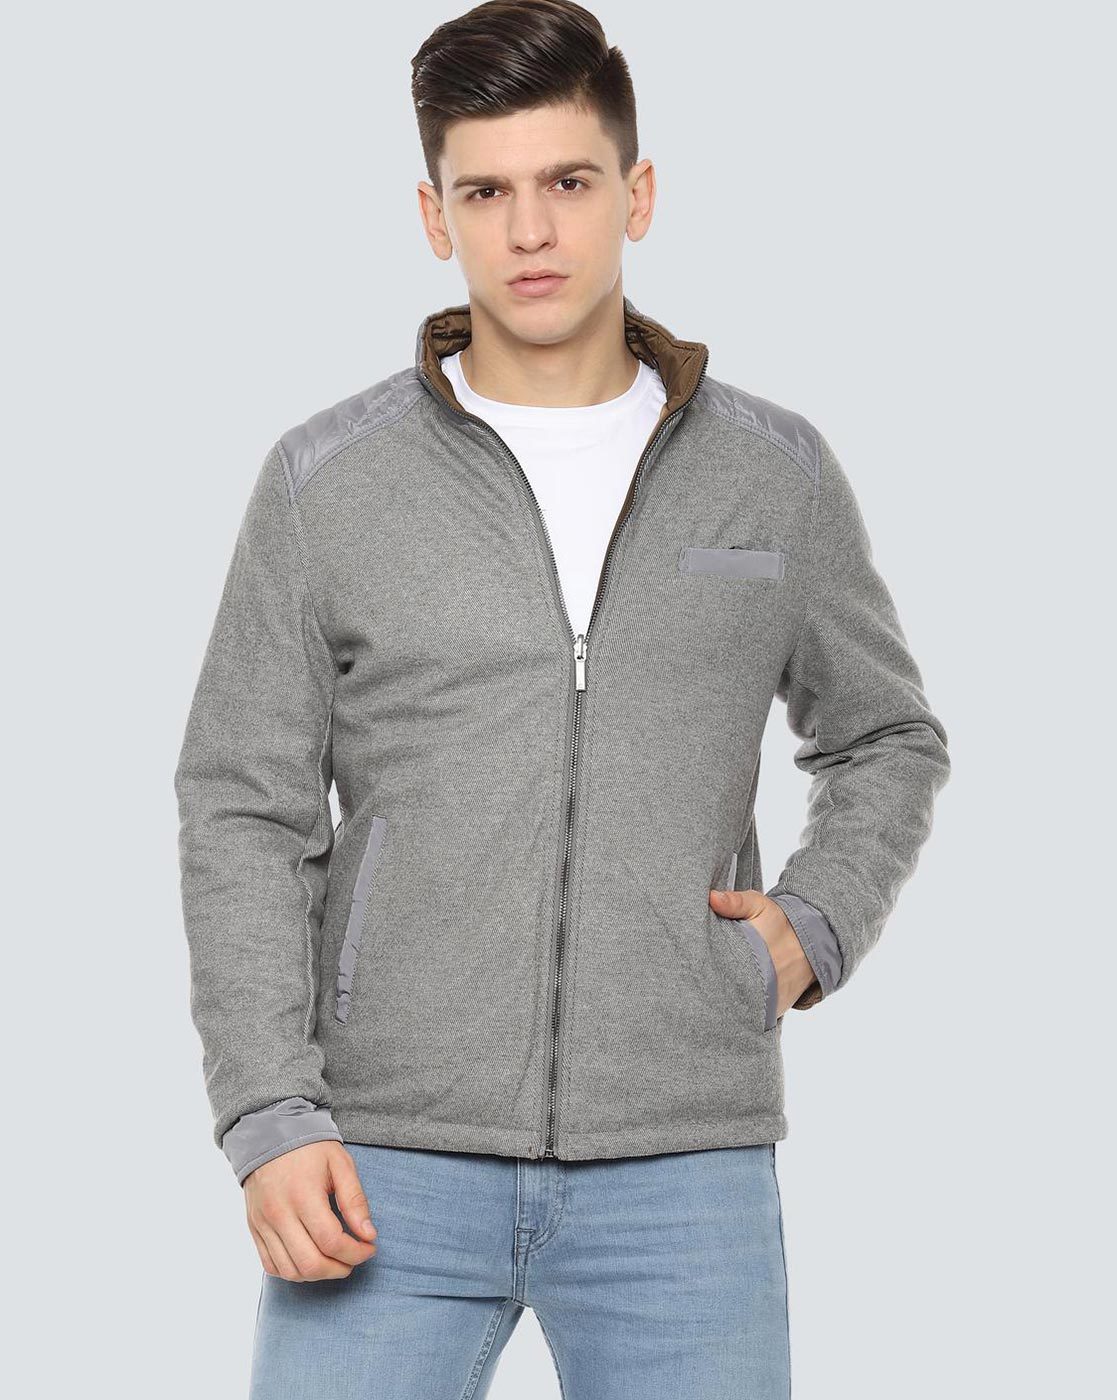 Buy Louis Philippe Reversible Bomber Jacket - Jackets for Men 25408200 |  Myntra